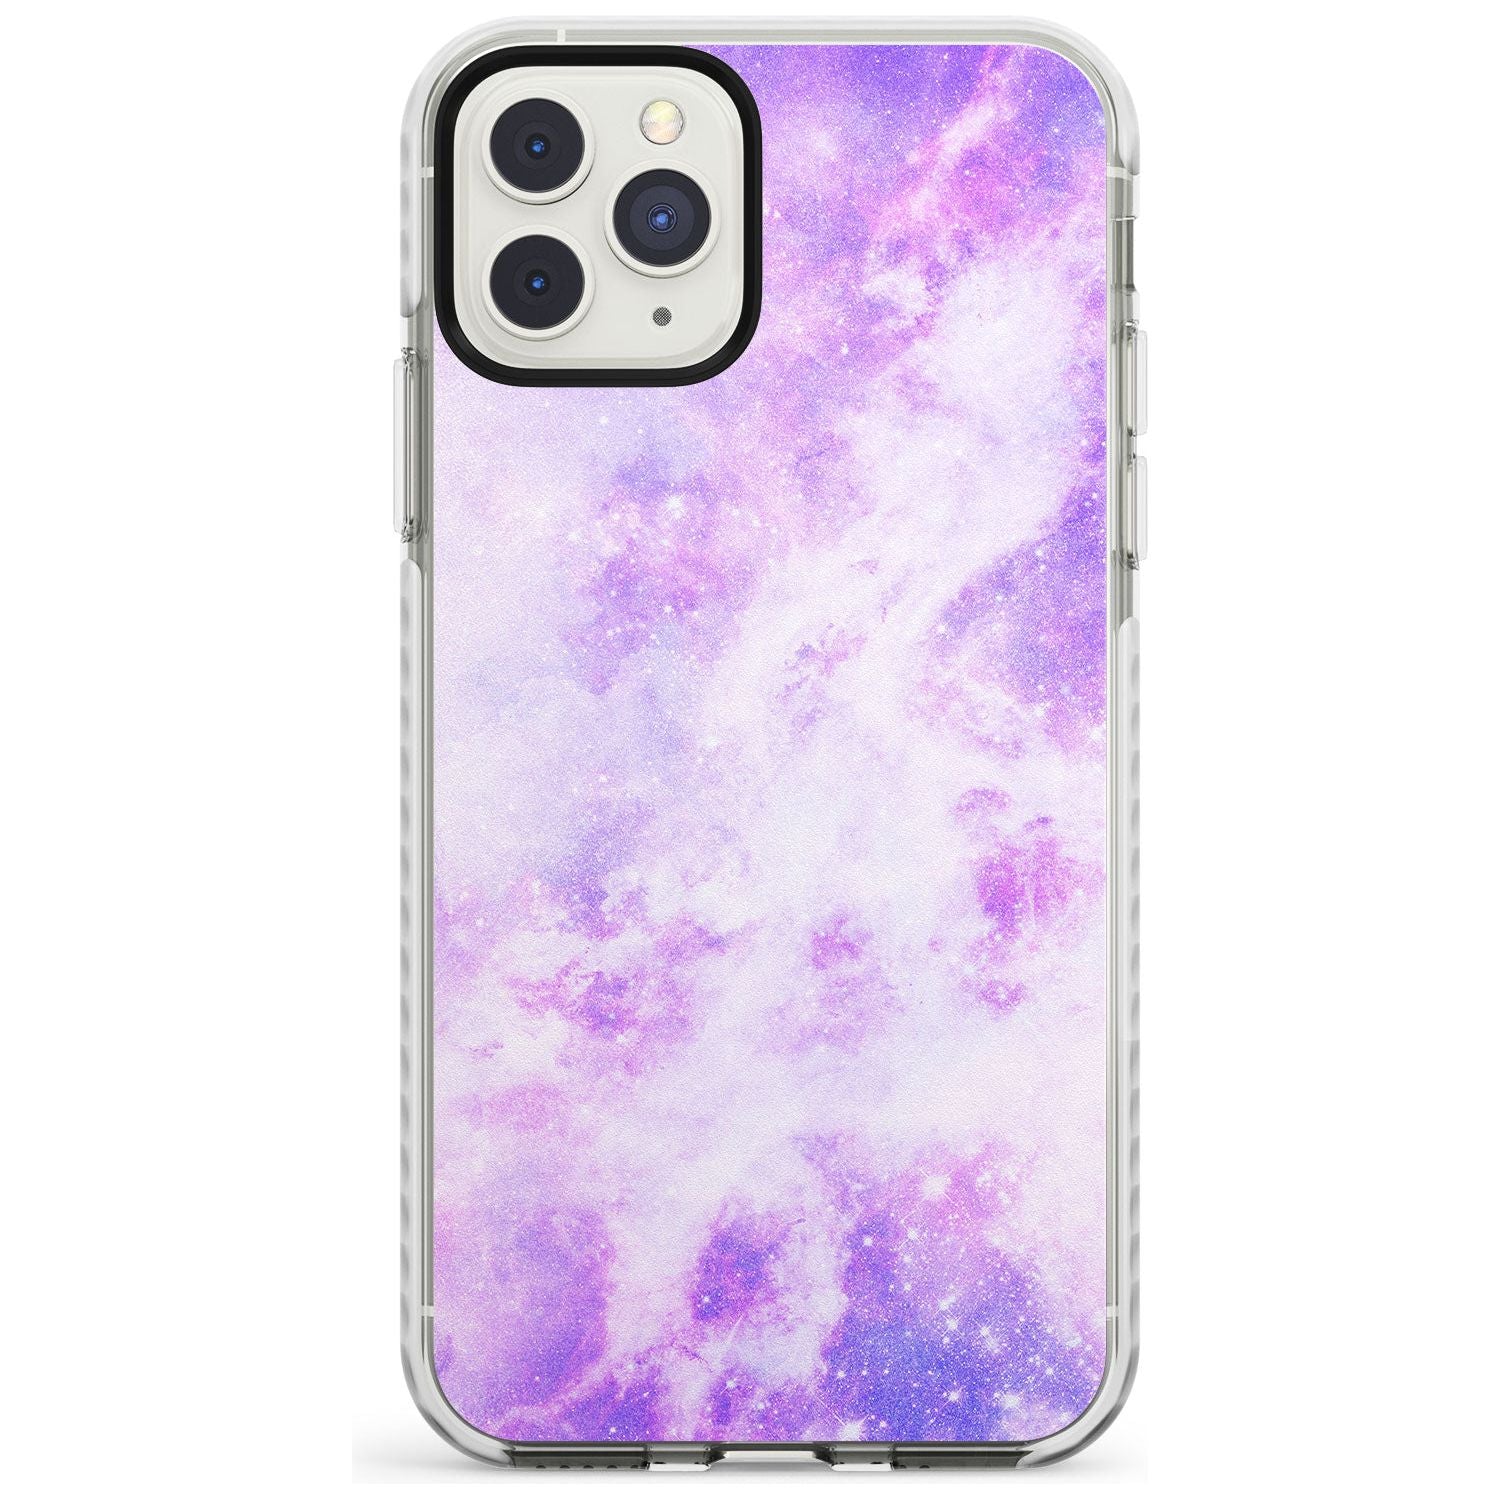 Purple Galaxy Pattern Design Impact Phone Case for iPhone 11 Pro Max